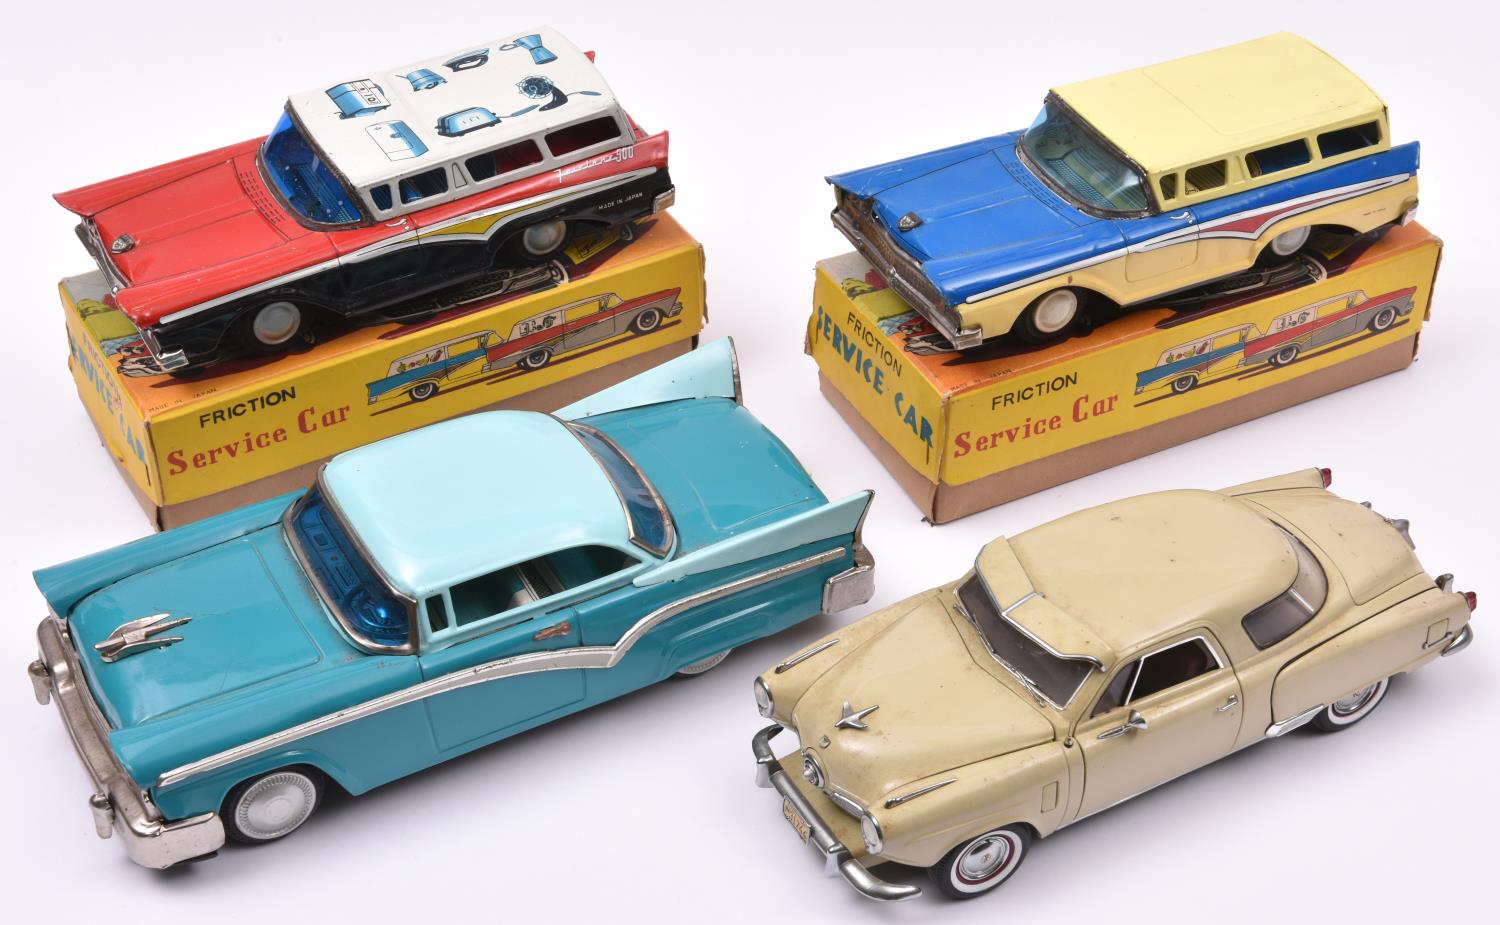 2 Japanese push along tinplate American Ford Fairlane Station Wagons. One in cream and mid blue with - Image 2 of 4